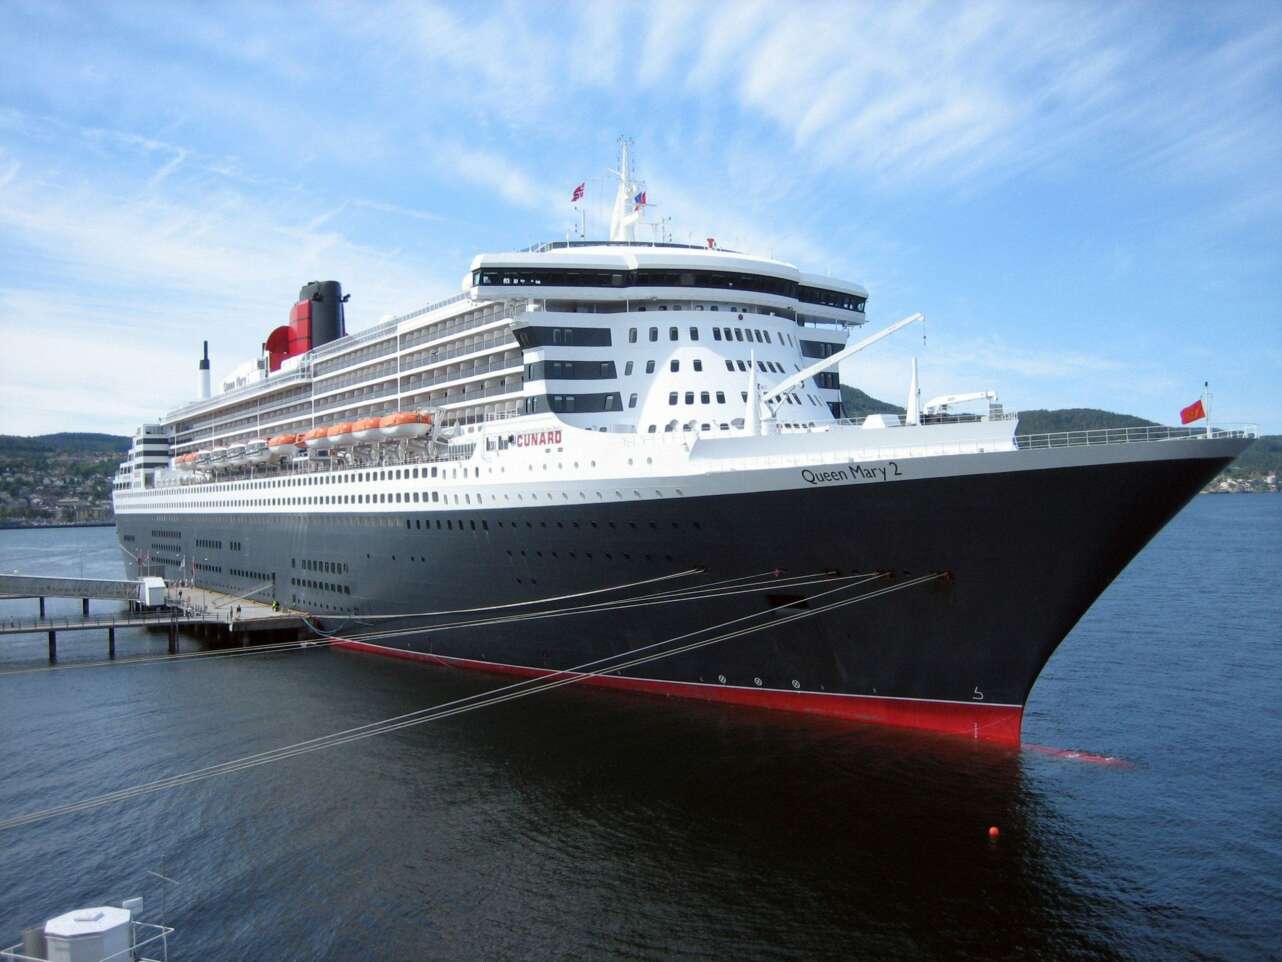 The Queen Mary 2 in 2007.